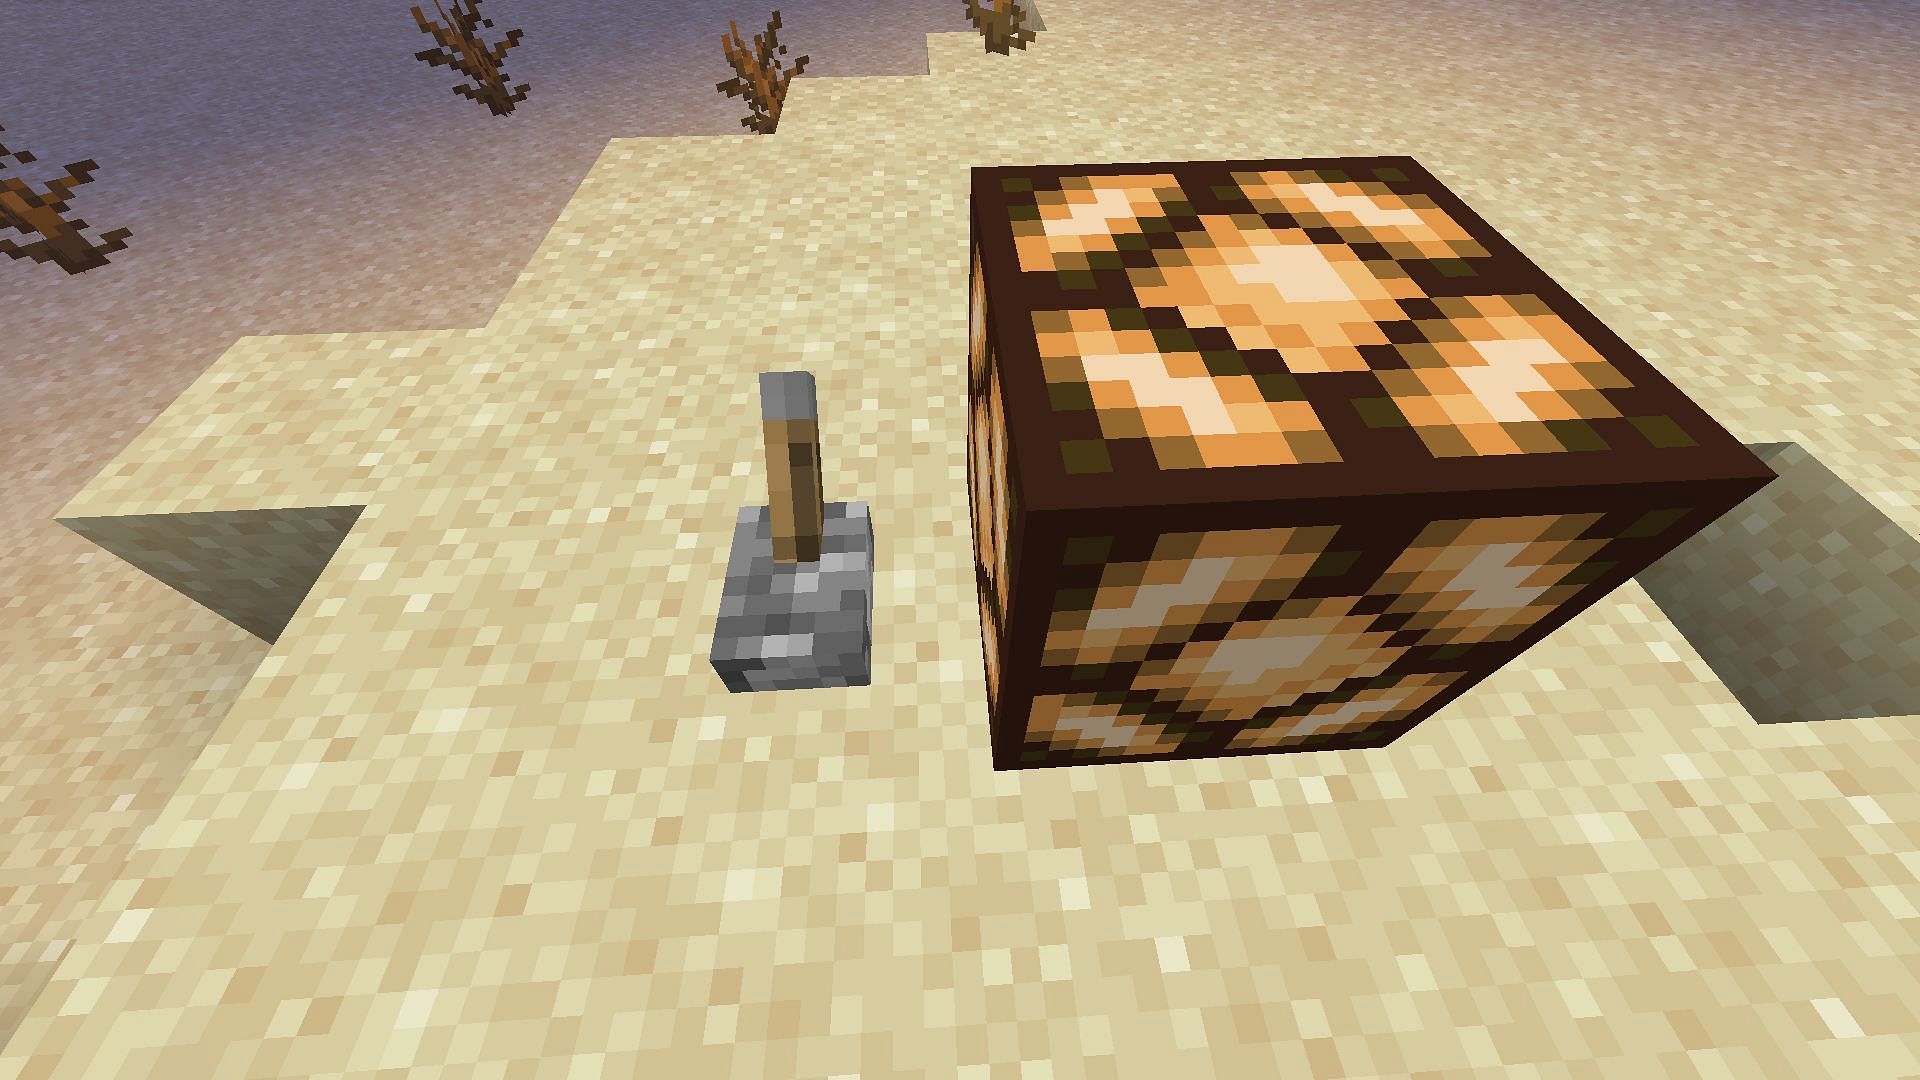 The item emits redstone signal when switched on (Image via Minecraft 1.19)